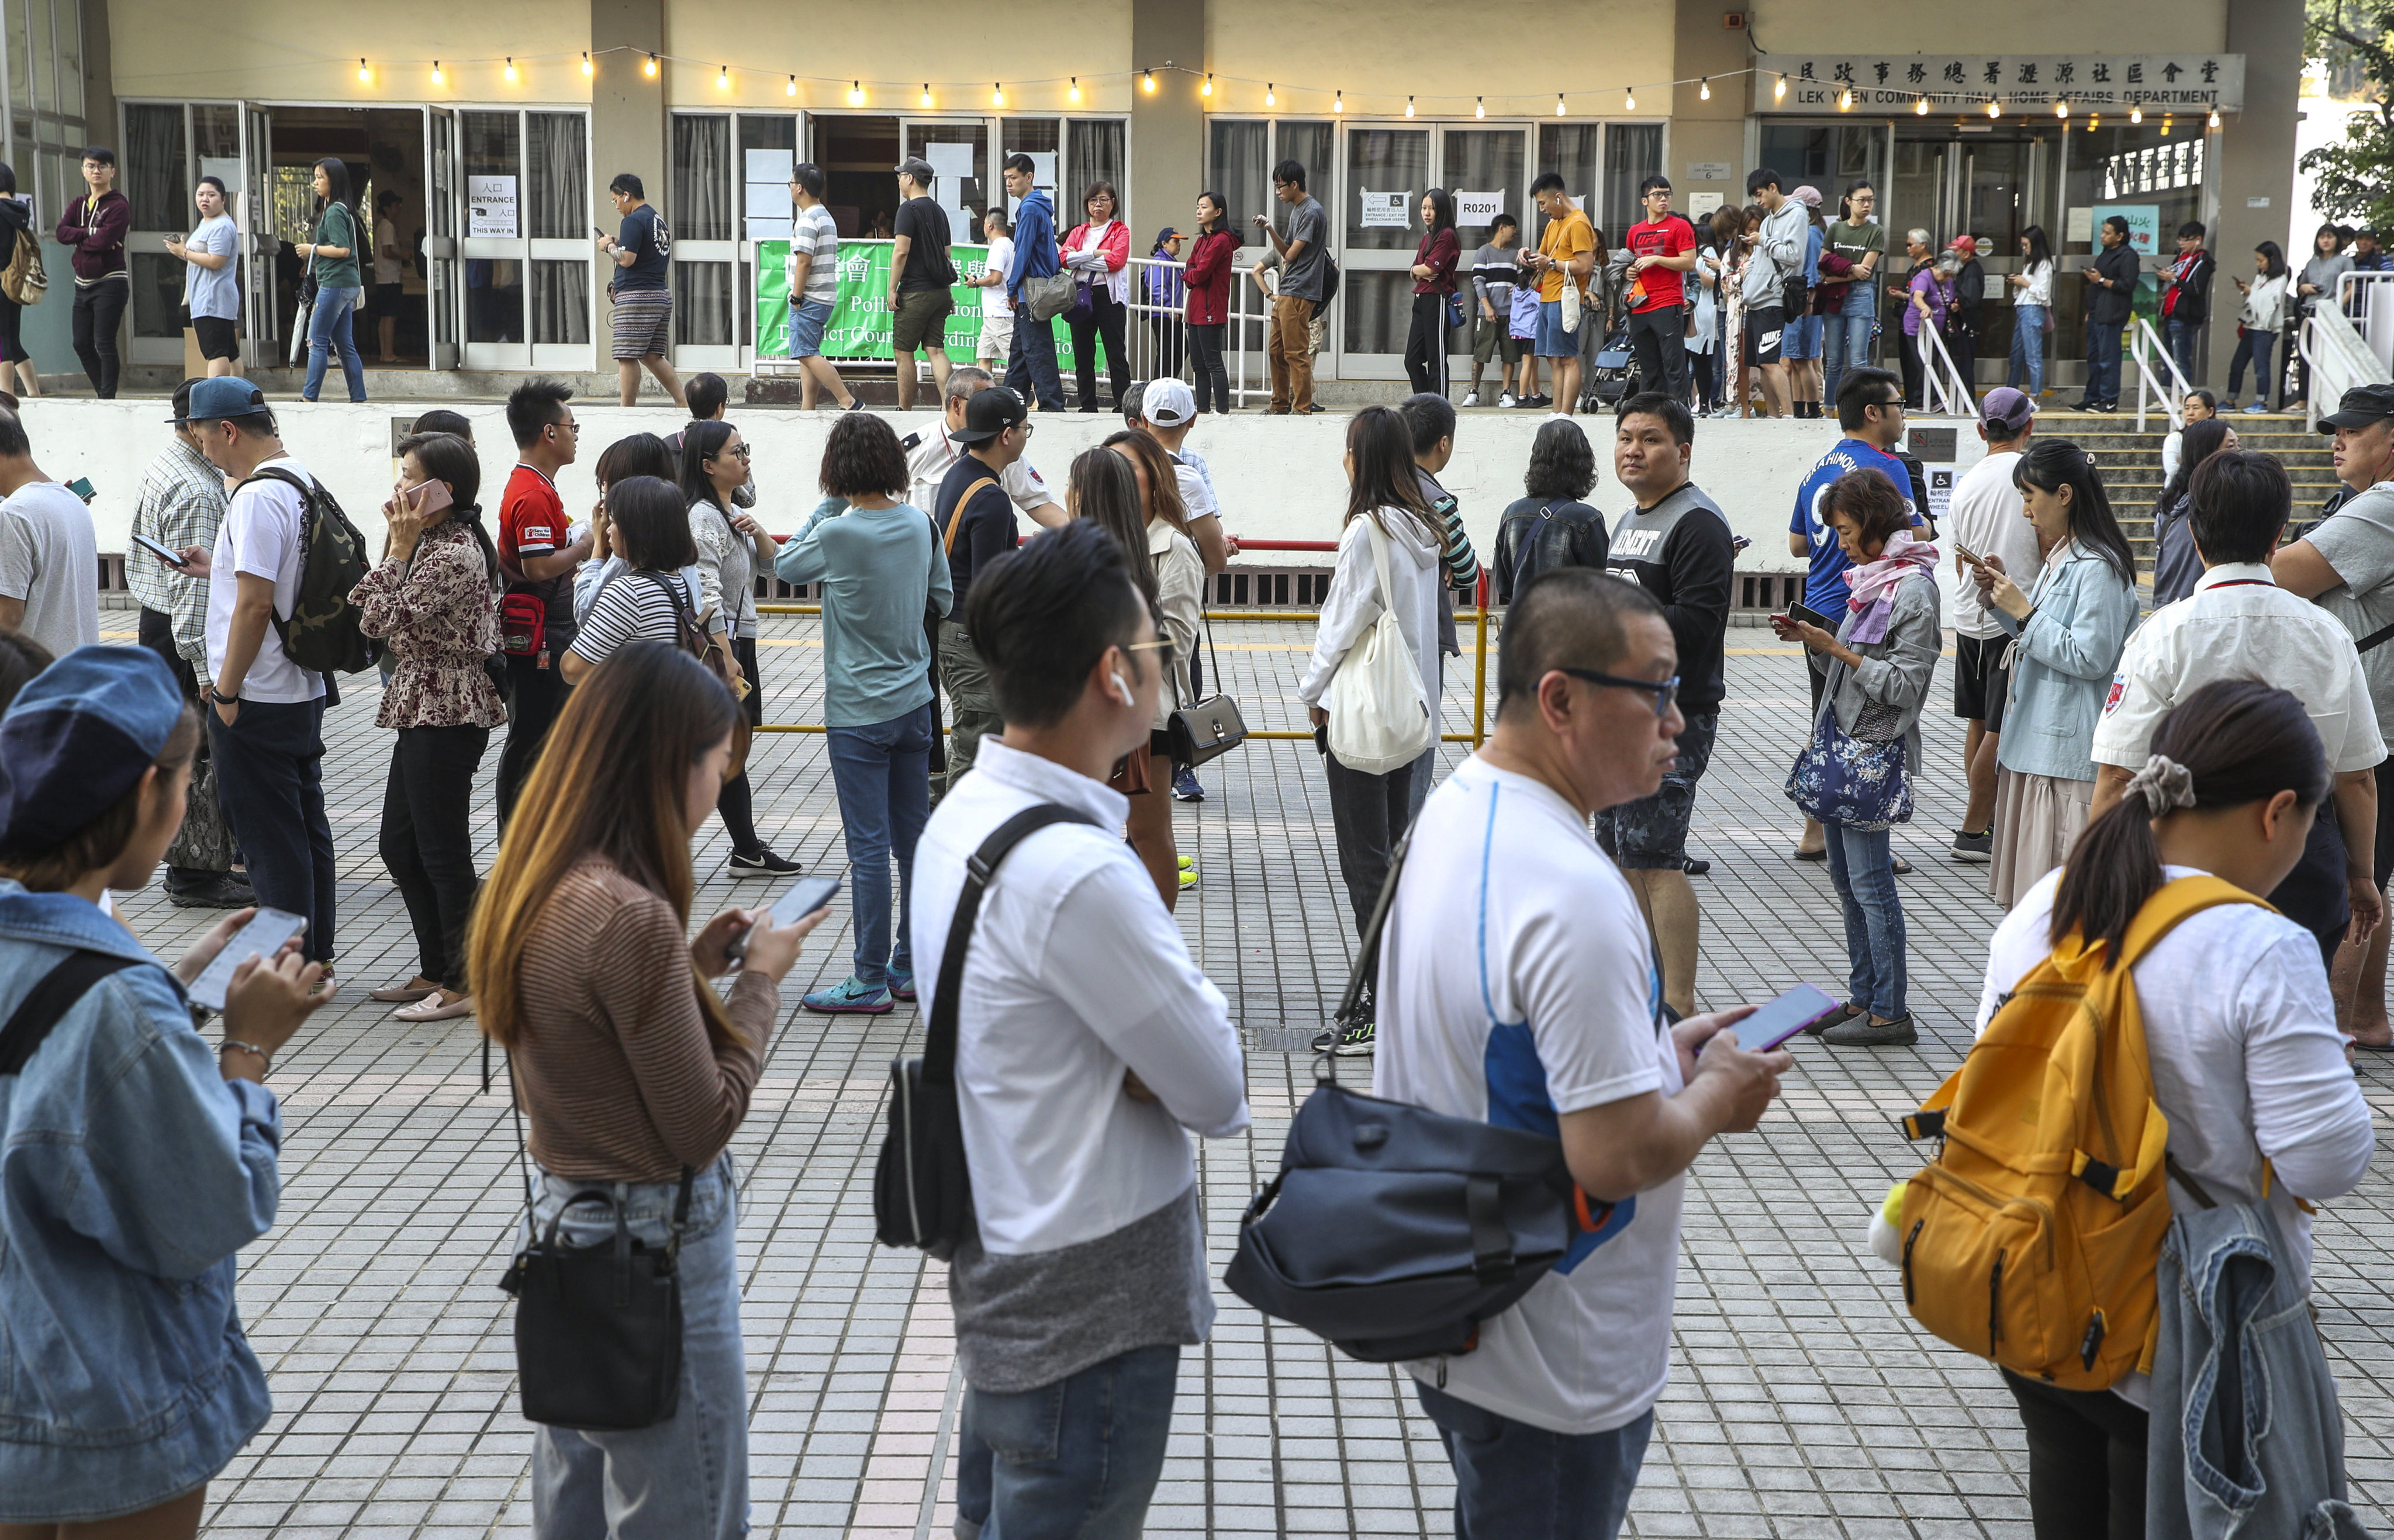 Residents queue for the district council election in 2019. Observers have linked candidates’ bland statements and apparent lack of effort to electoral changes that created enlarged constituencies, and voters’ lack of interest in municipal affairs. Photo: Winson Wong